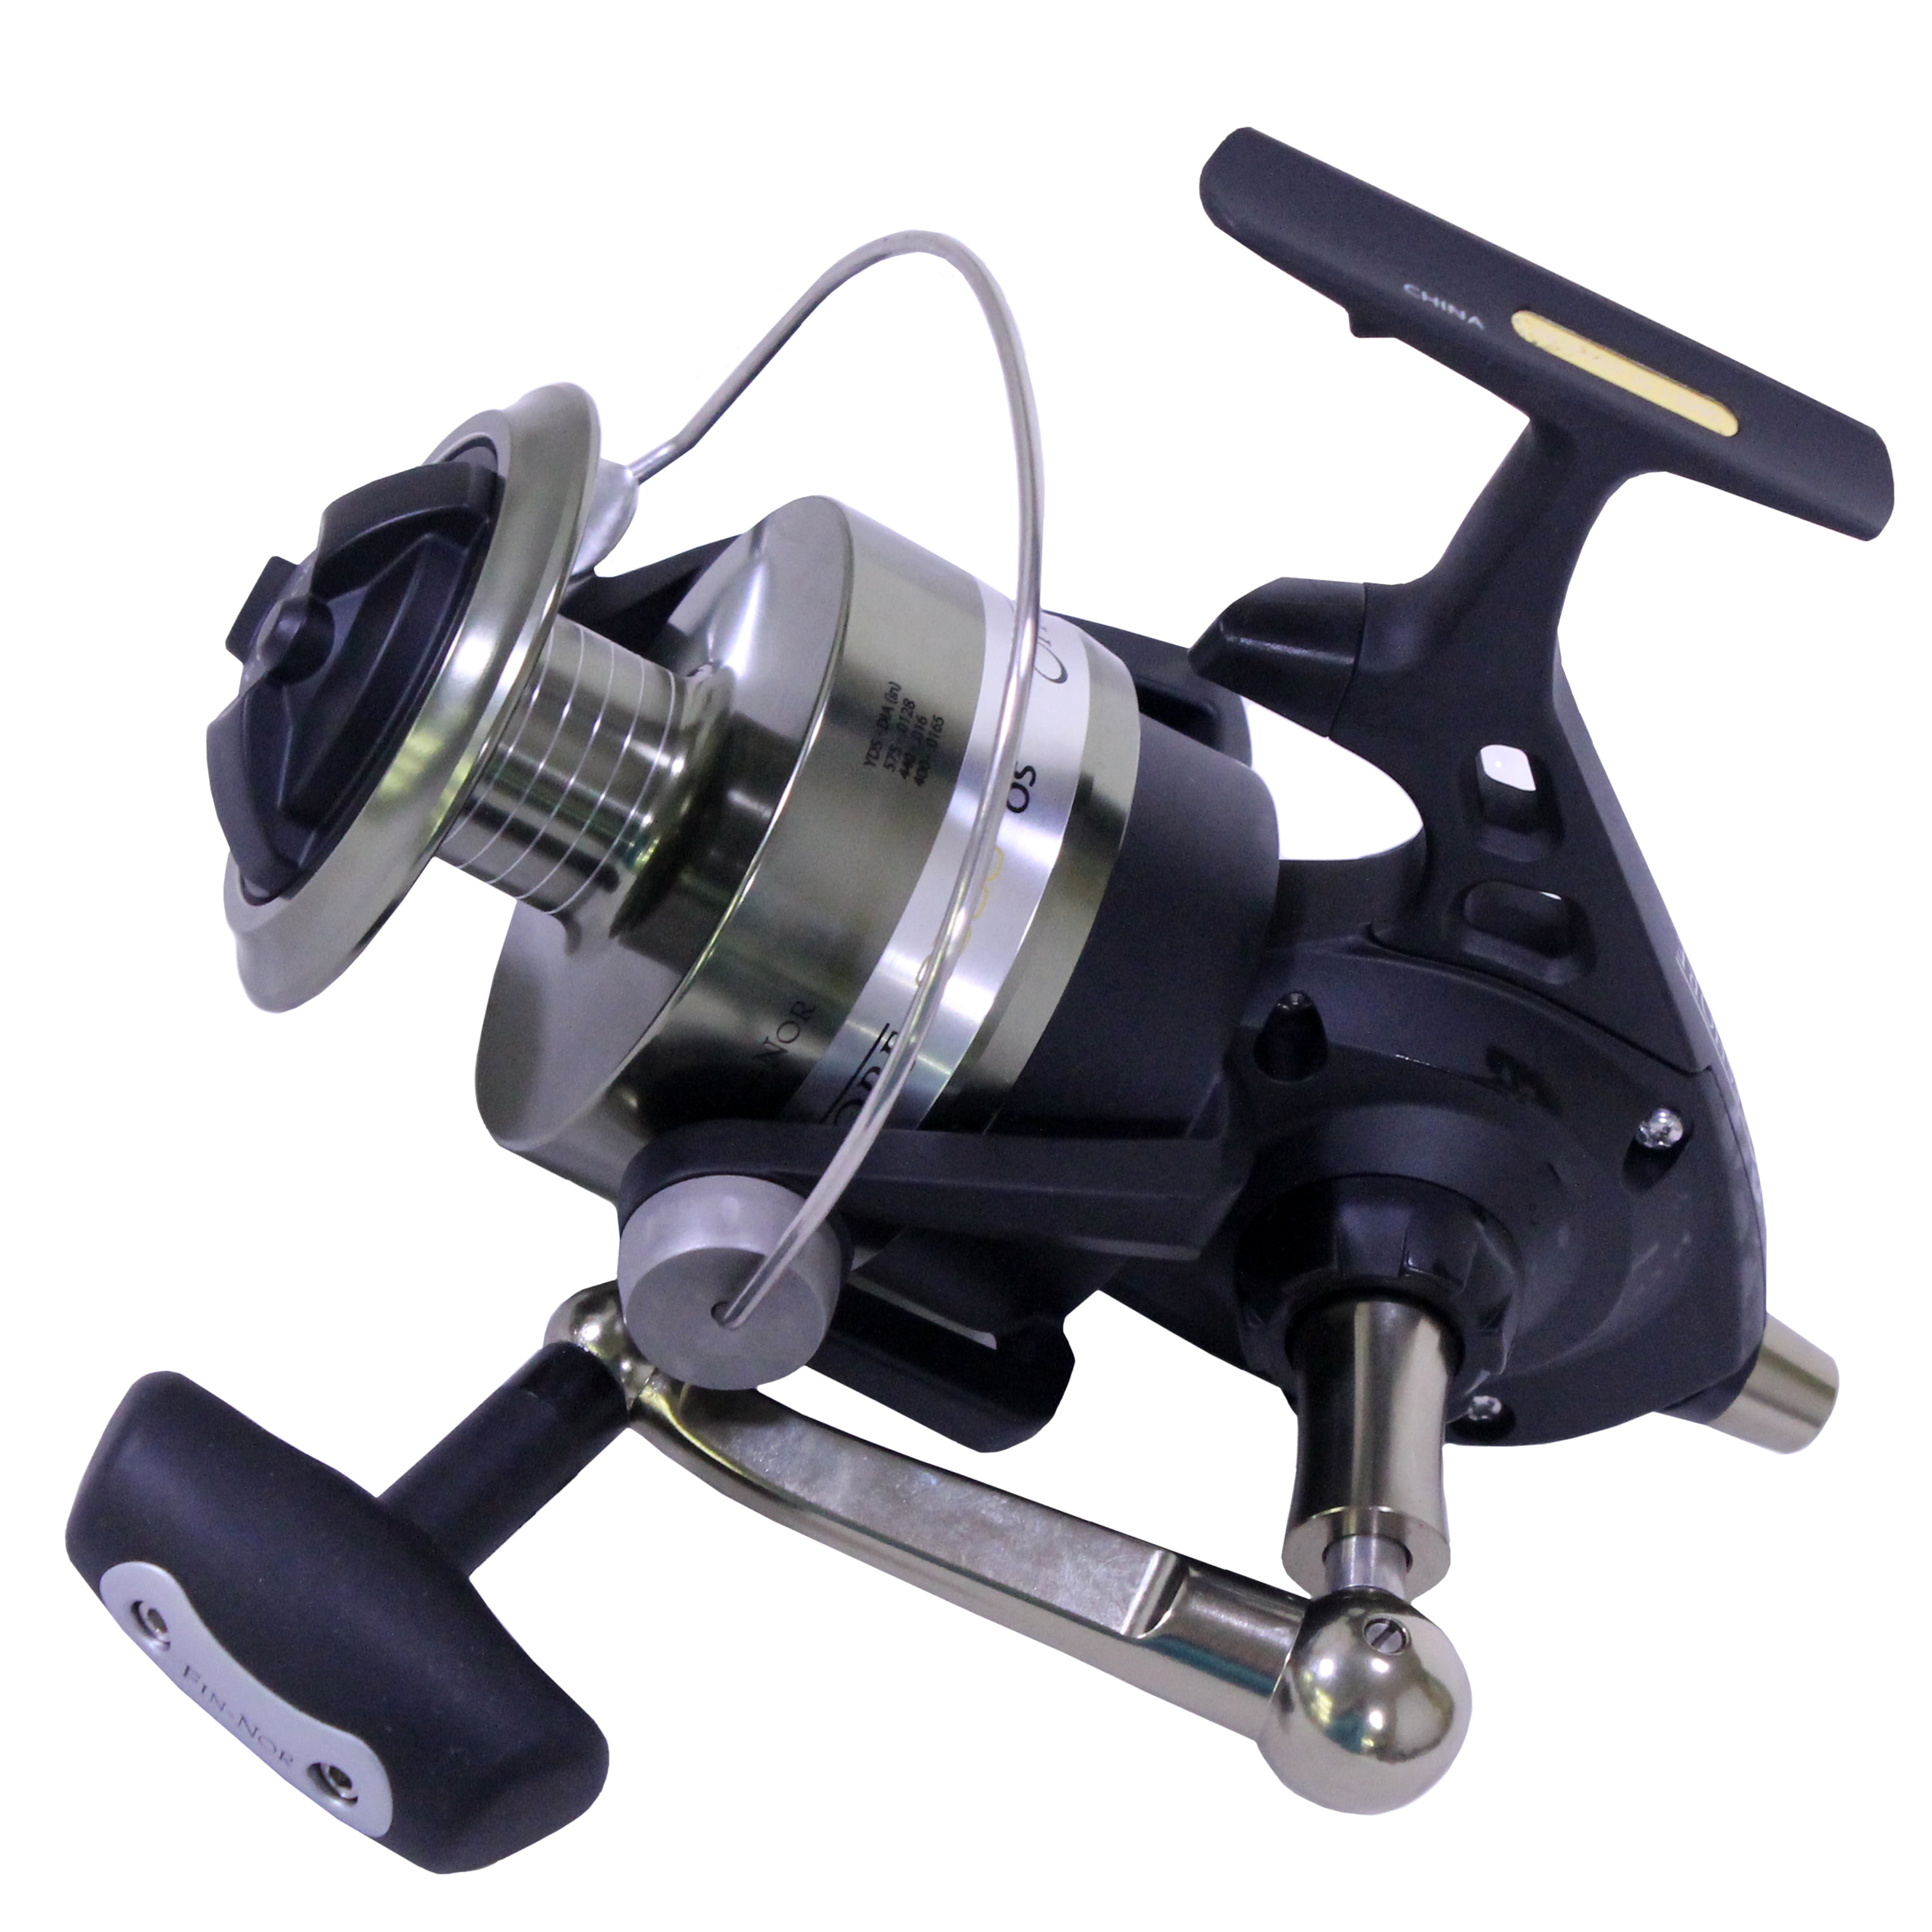 Fin-Nor Off Shore Spinning Reel OFS6500 400 yards 